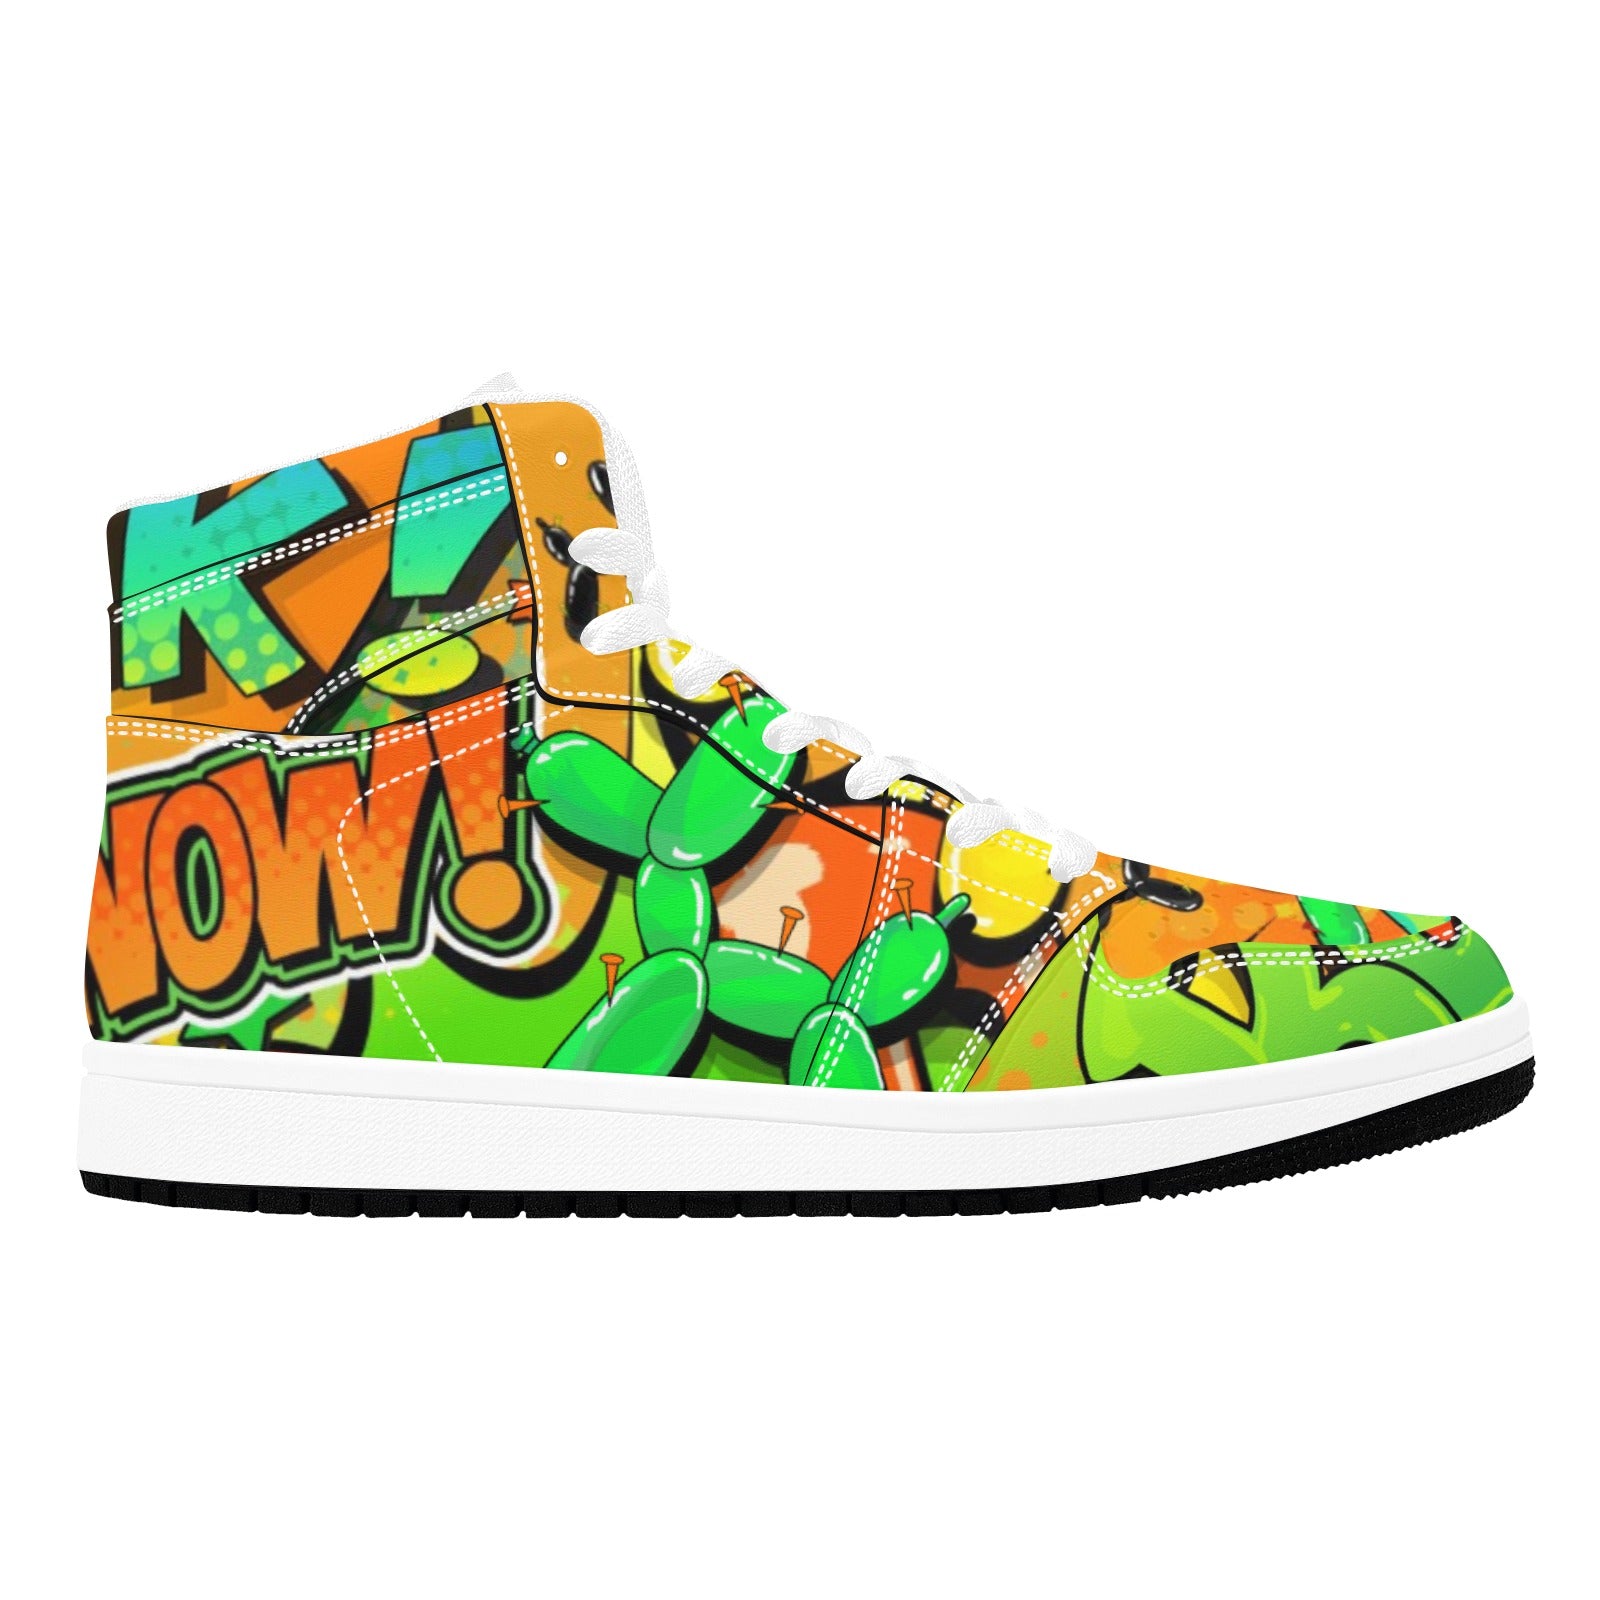 Fun colourful high top shoes for balloon artists and entertainers